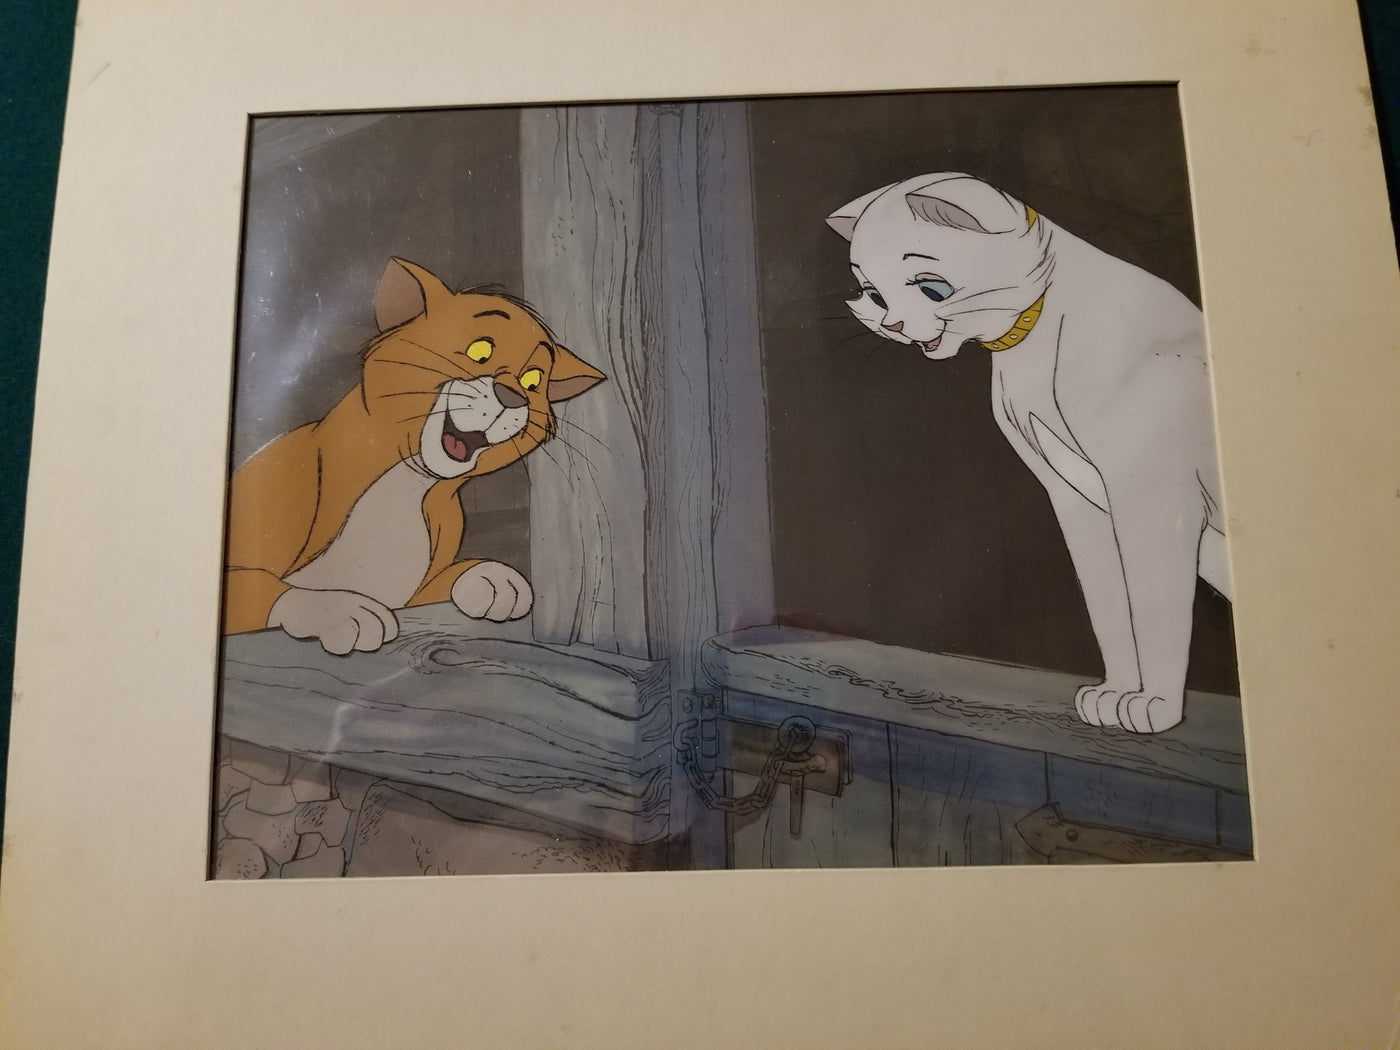 Original Walt Disney Production Cel from The Aristocats featuring Thomas O'Malley and Duchess